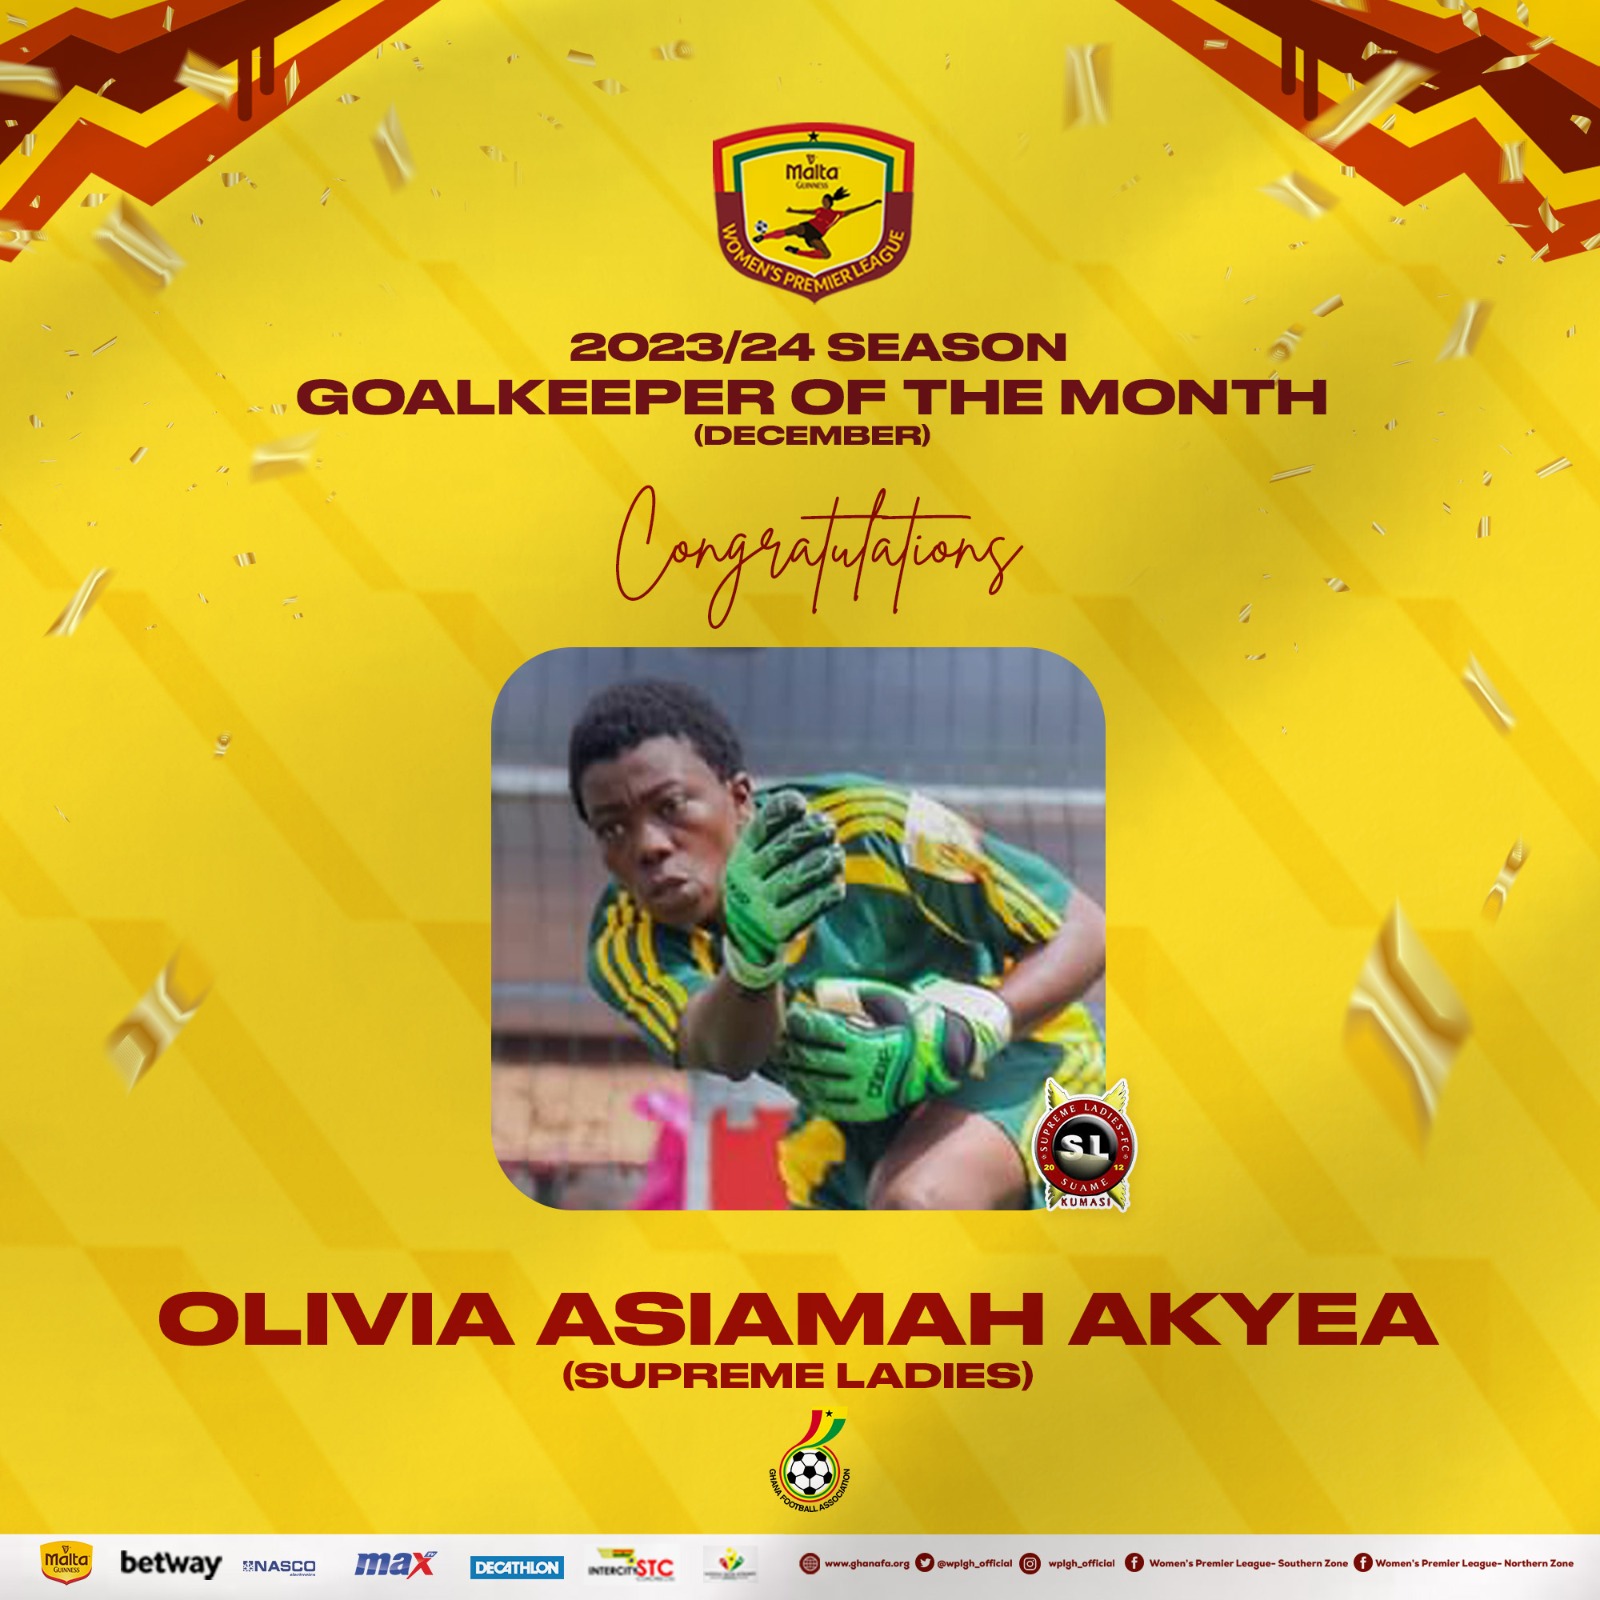 Olivia Asiamah wins RG World goalkeeper of the month for December